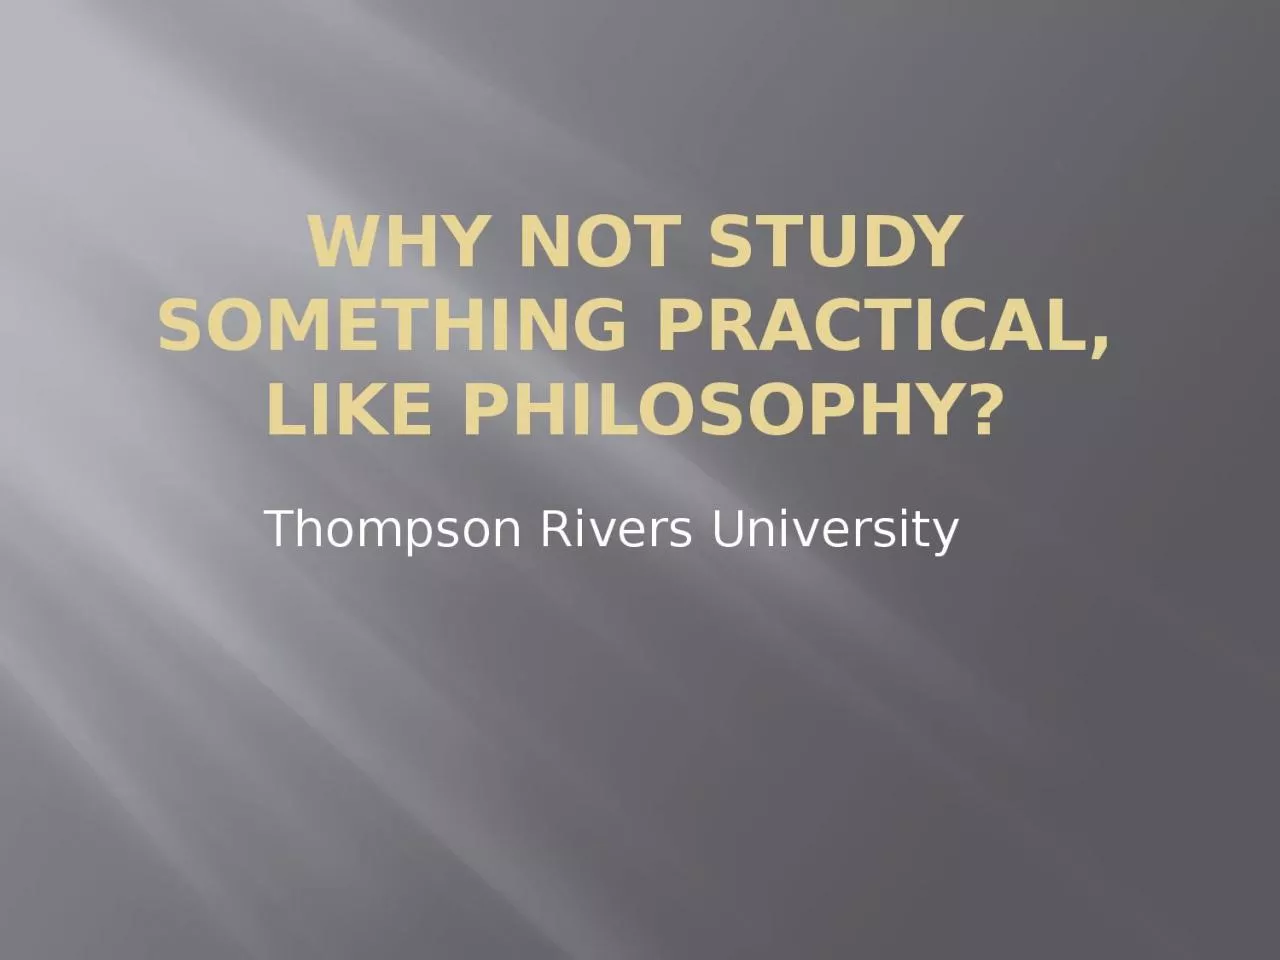 Why not study something Practical, Like PHILOSOPHY?